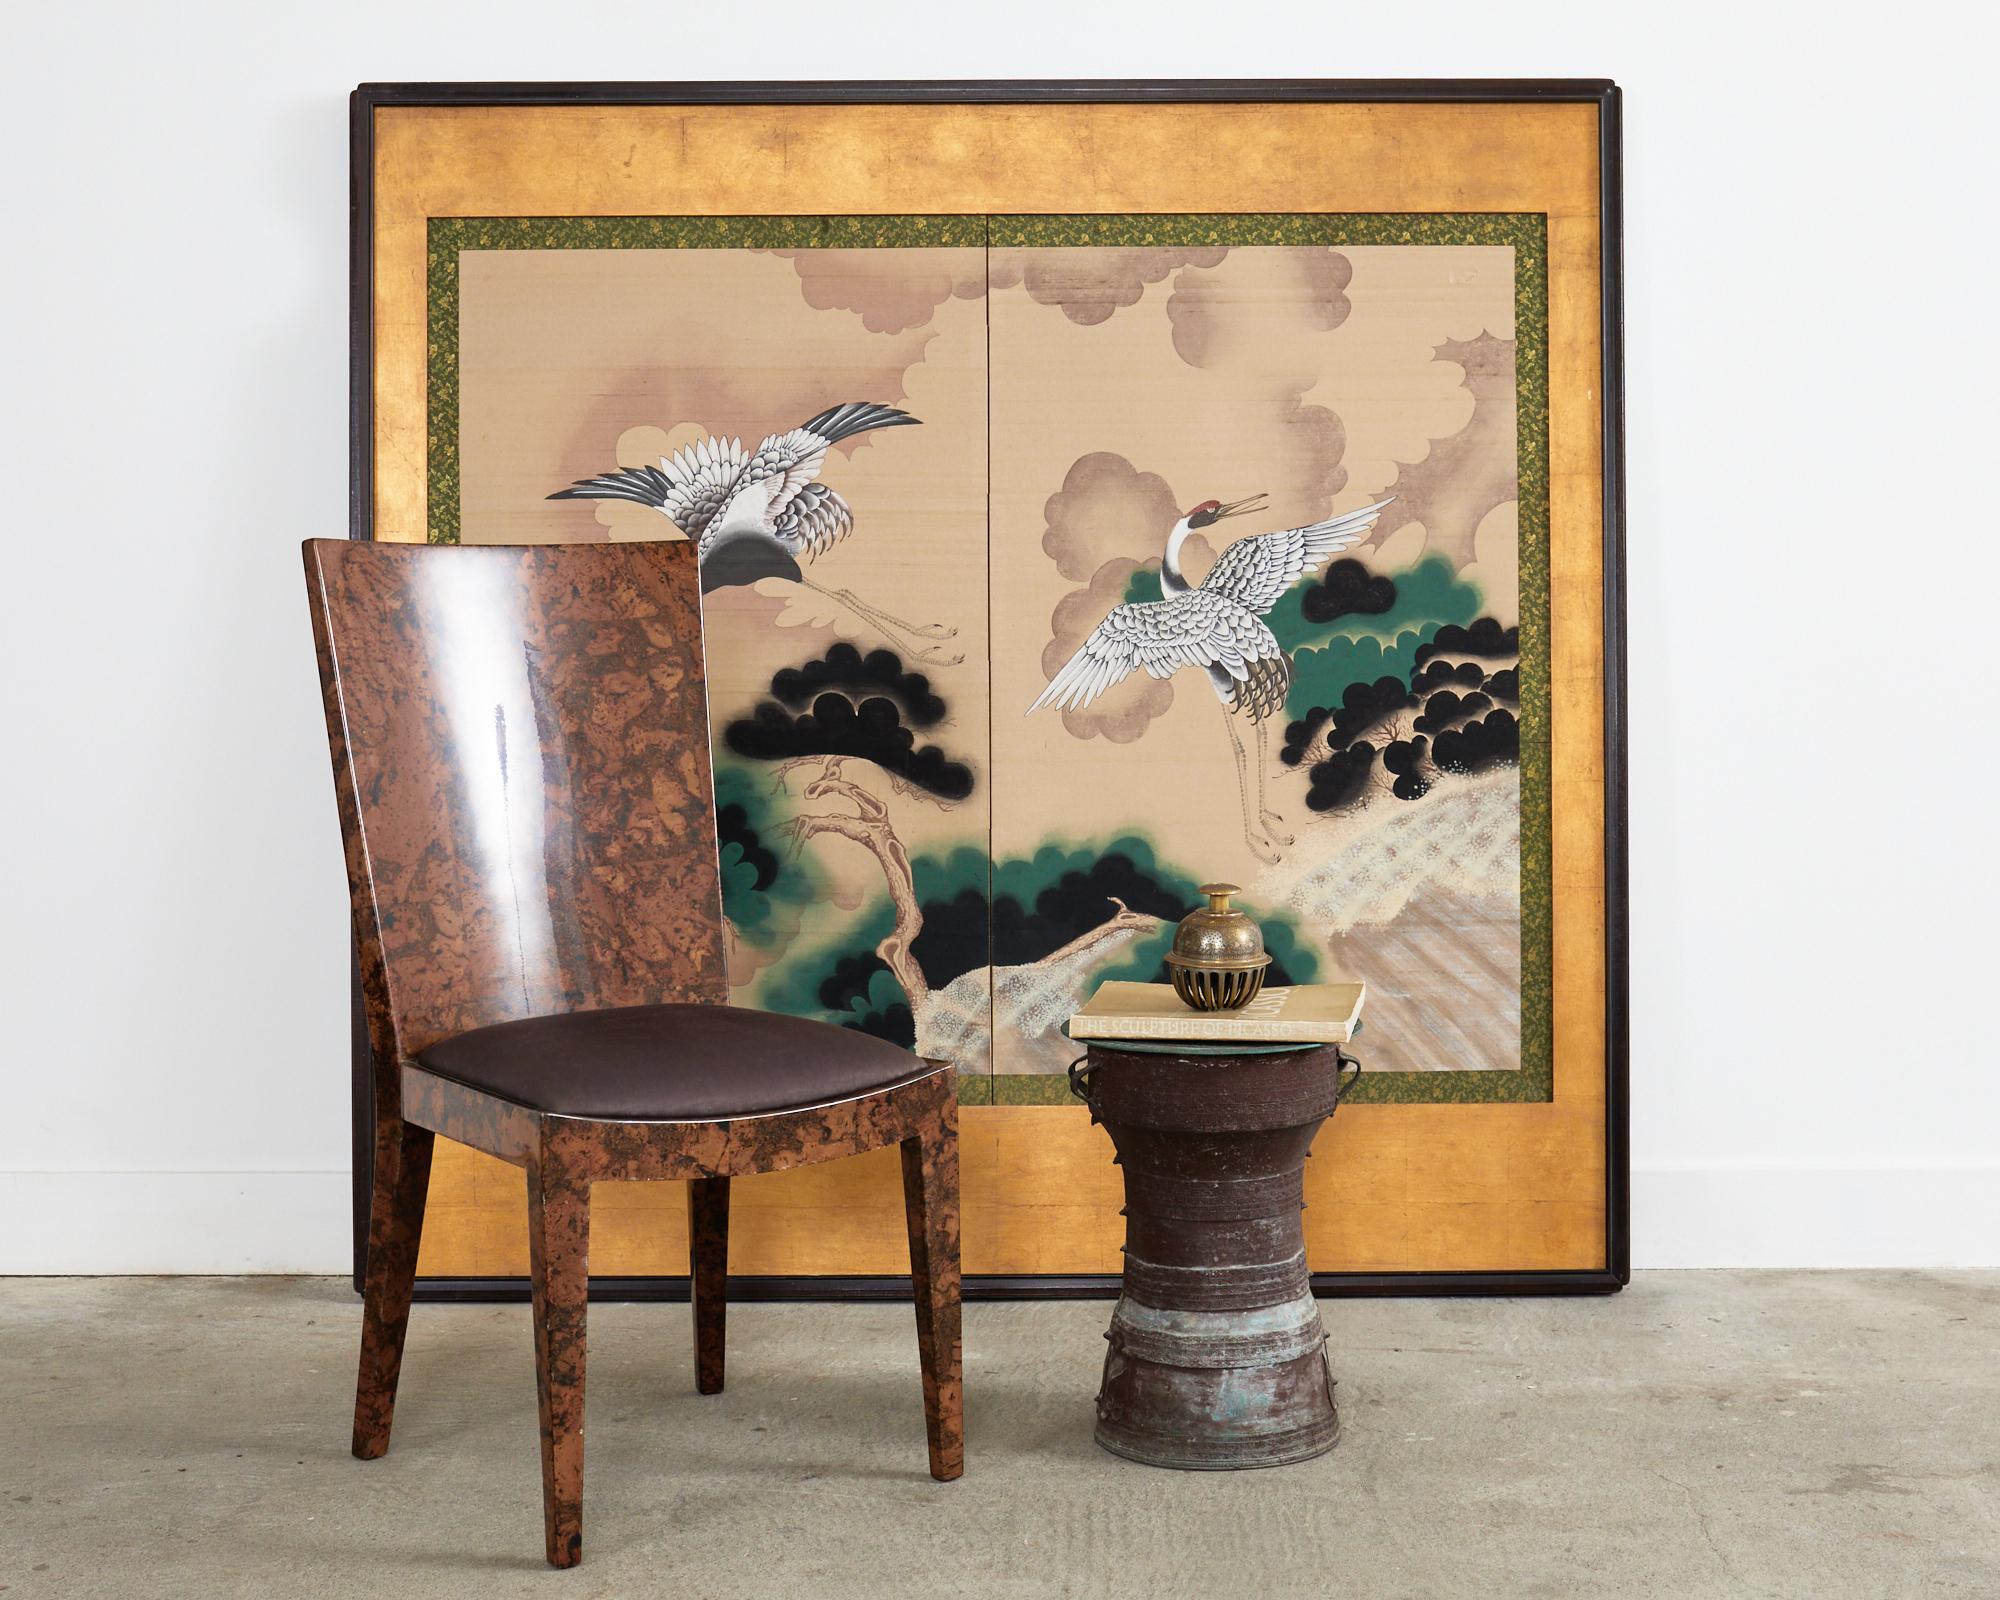 Imposing Japanese Showa period two panel byobu screen later mounted in a large gilt and ebonized wood frame. The screen depicts a pair of large redheaded Manchurian cranes flying amid the stylized pine trees and clouds. Ink and natural color